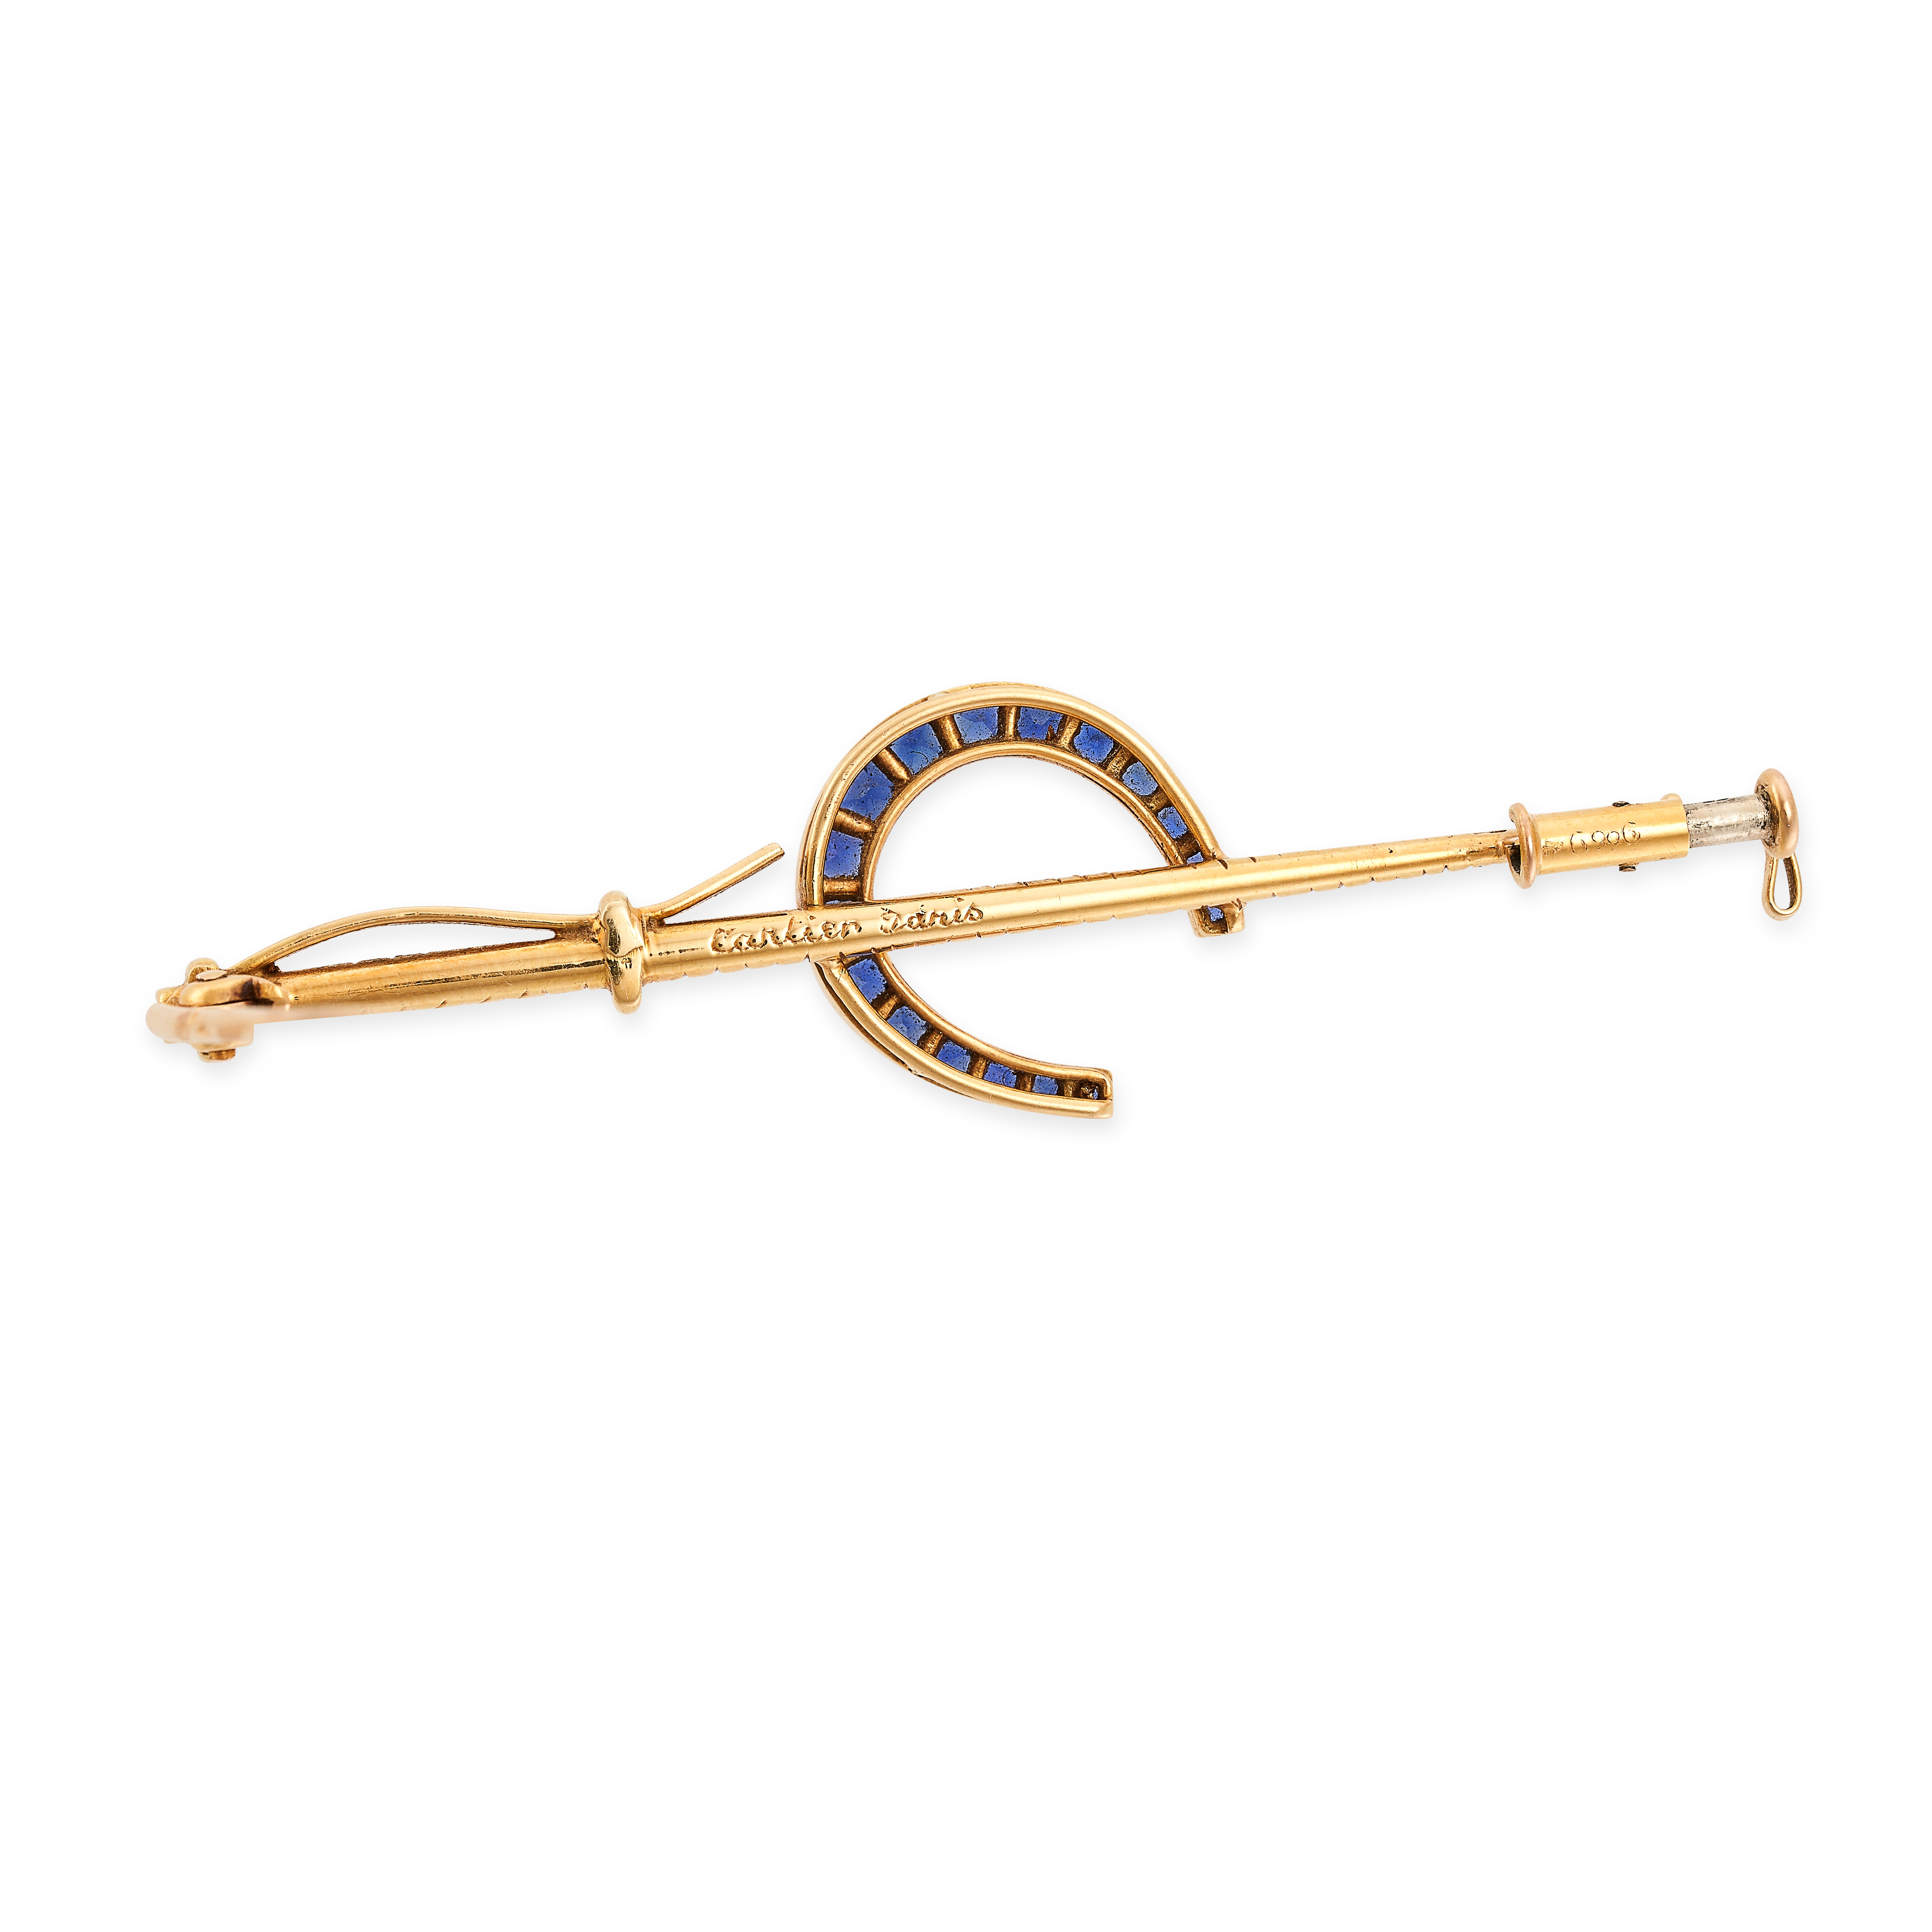 CARTIER, A SAPPHIRE STOCK PIN BROOCH in 18ct yellow gold, designed as a riding crop and horse shoe - Image 2 of 2